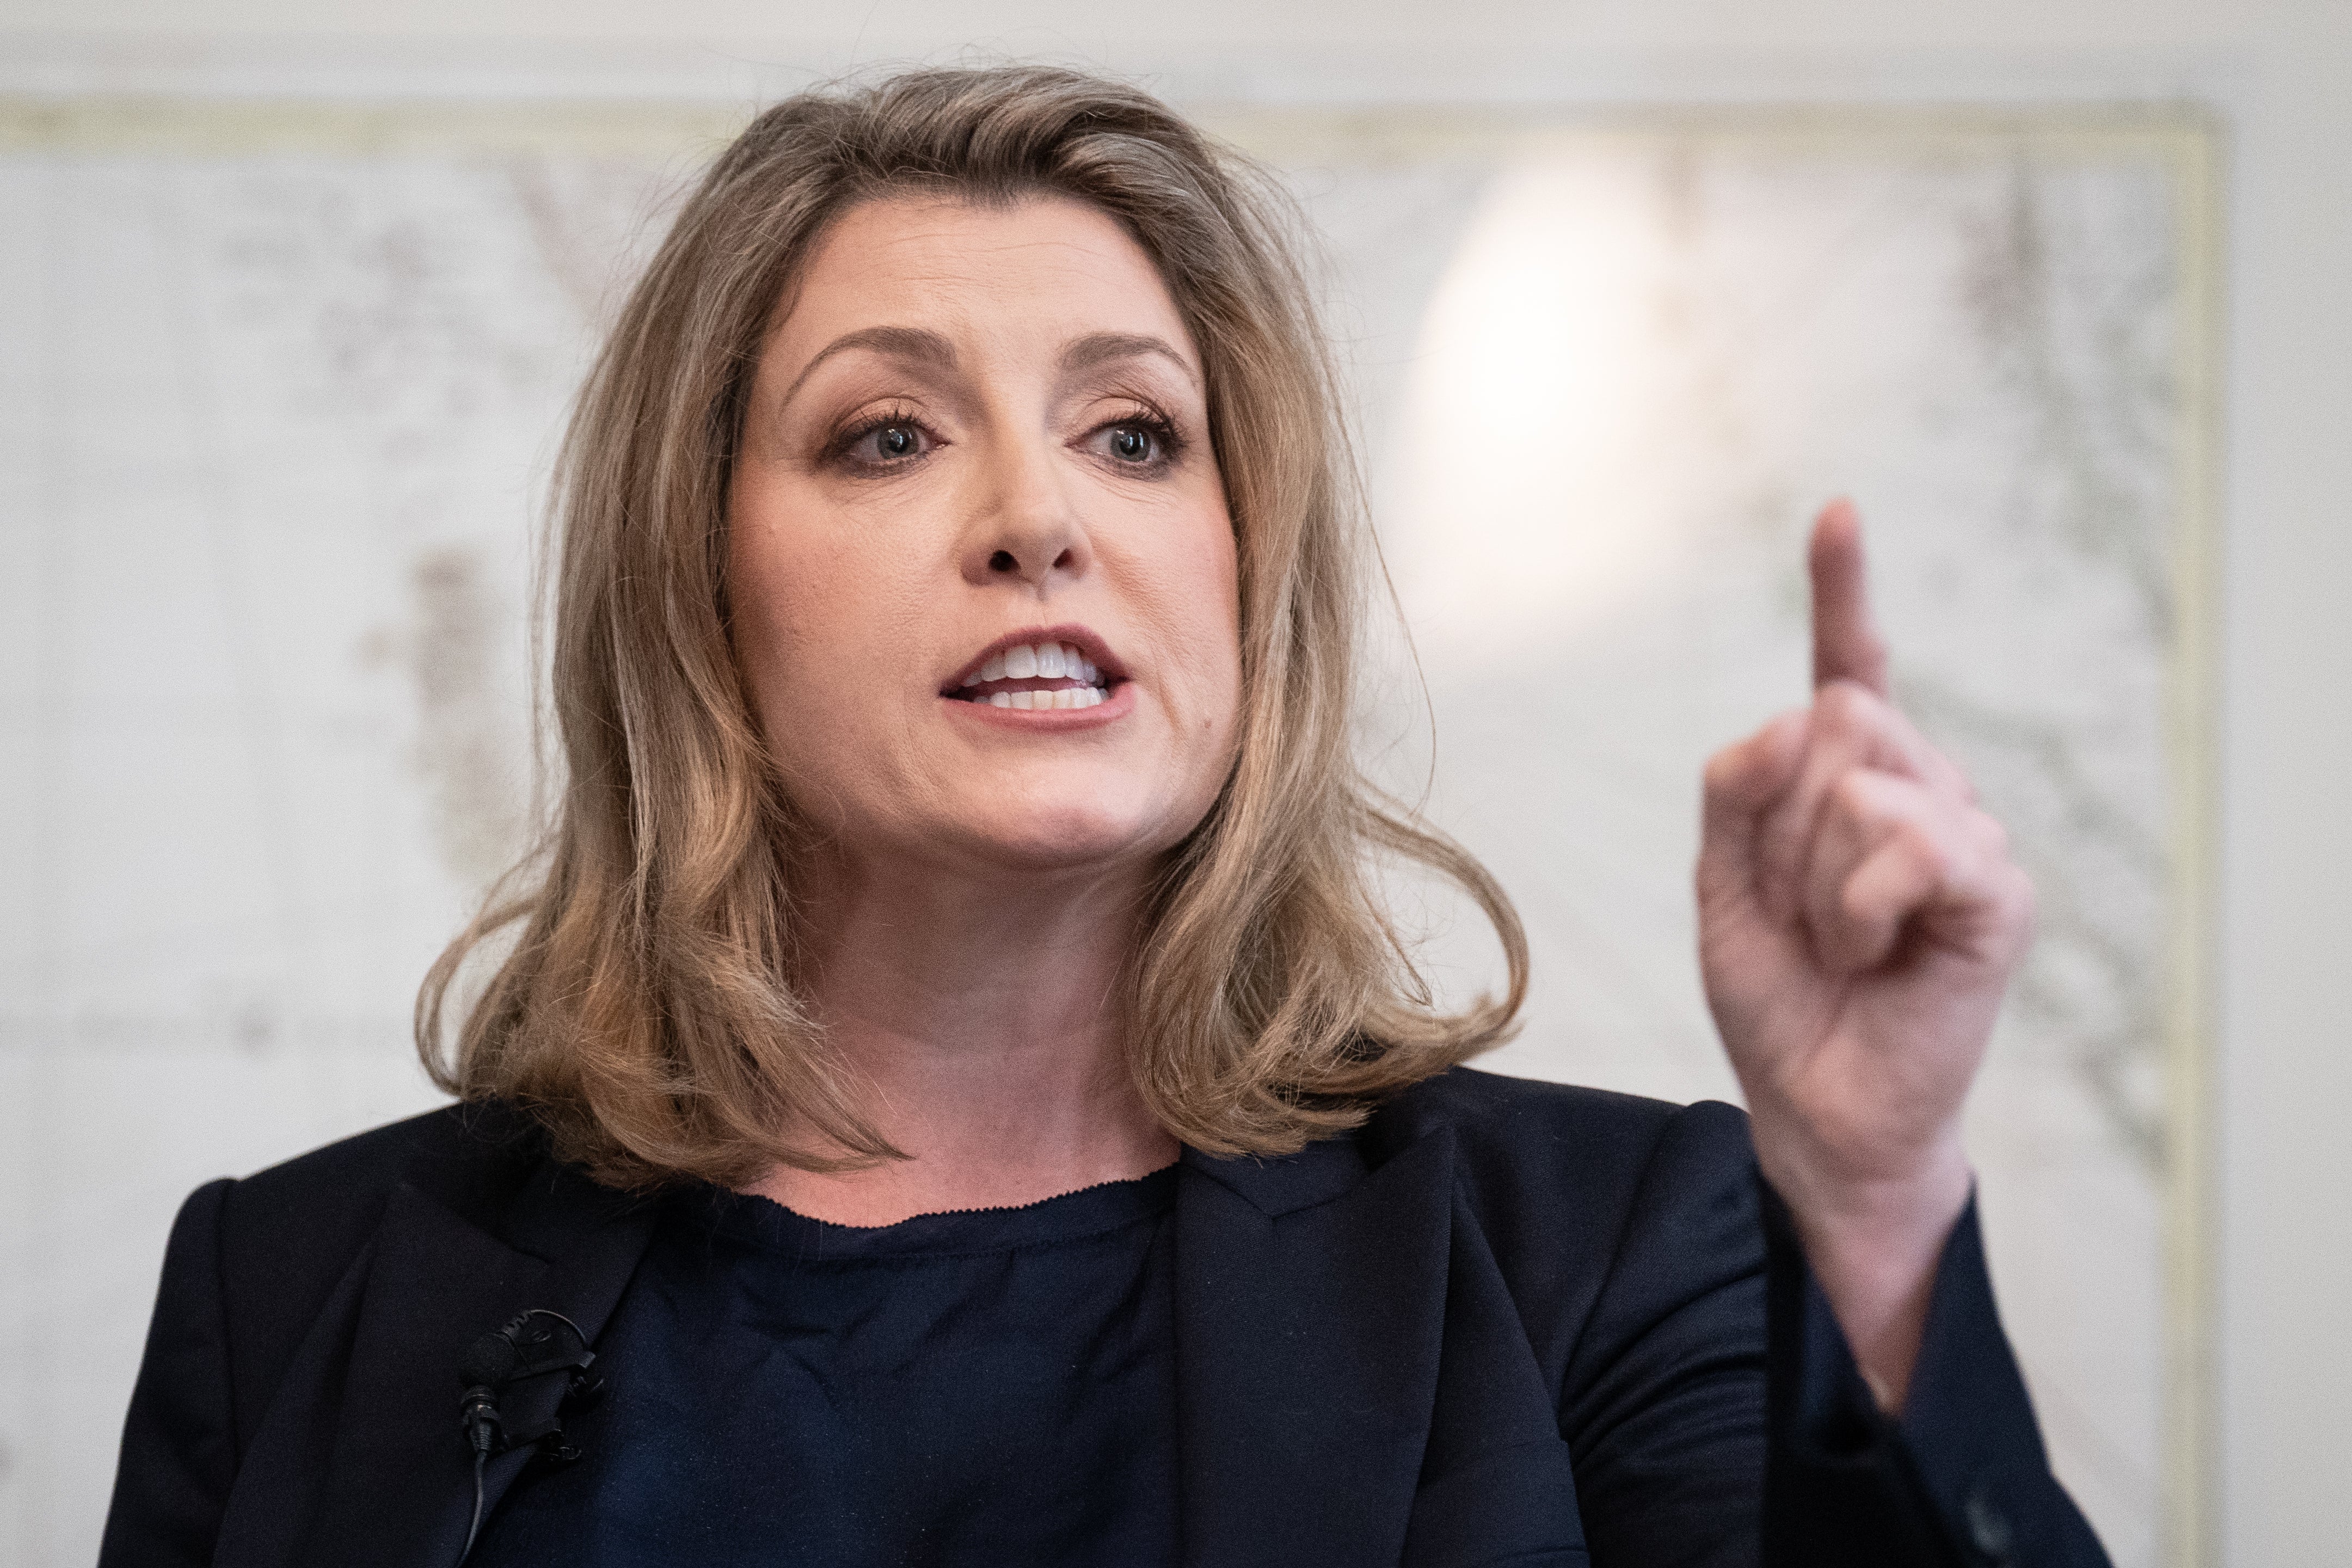 Penny Mordaunt has come under fire from rival camps after pulling ahead of Foreign Secretary Liz Truss in the first ballot in the Tory leadership contest (Stefan Rousseau/PA)